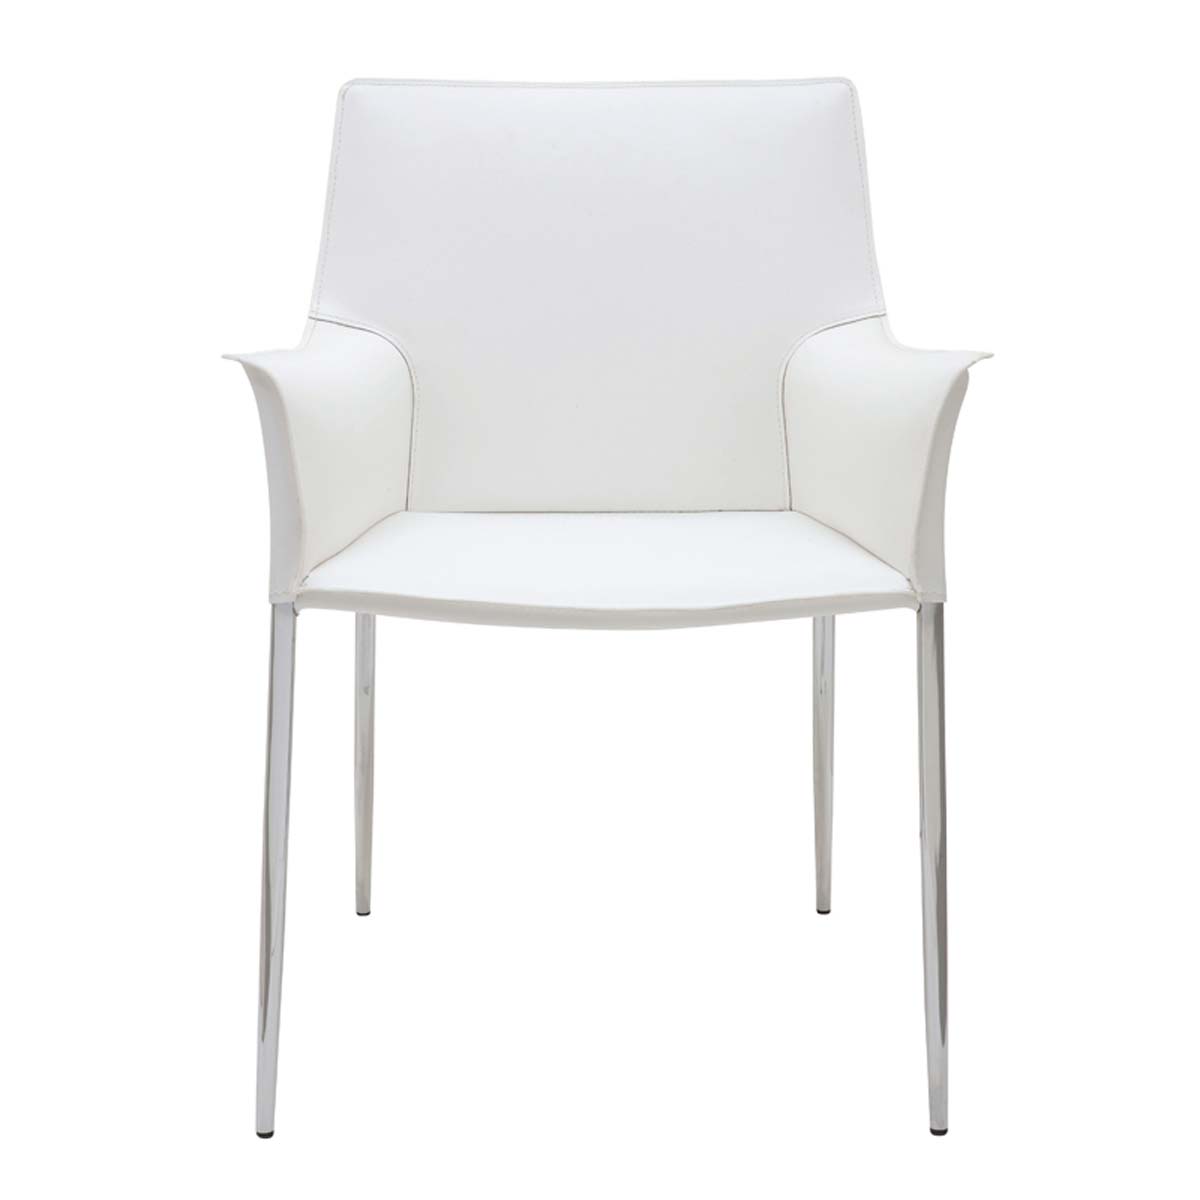 Nuevo Colter Leather/Chrome Dining Chair - White